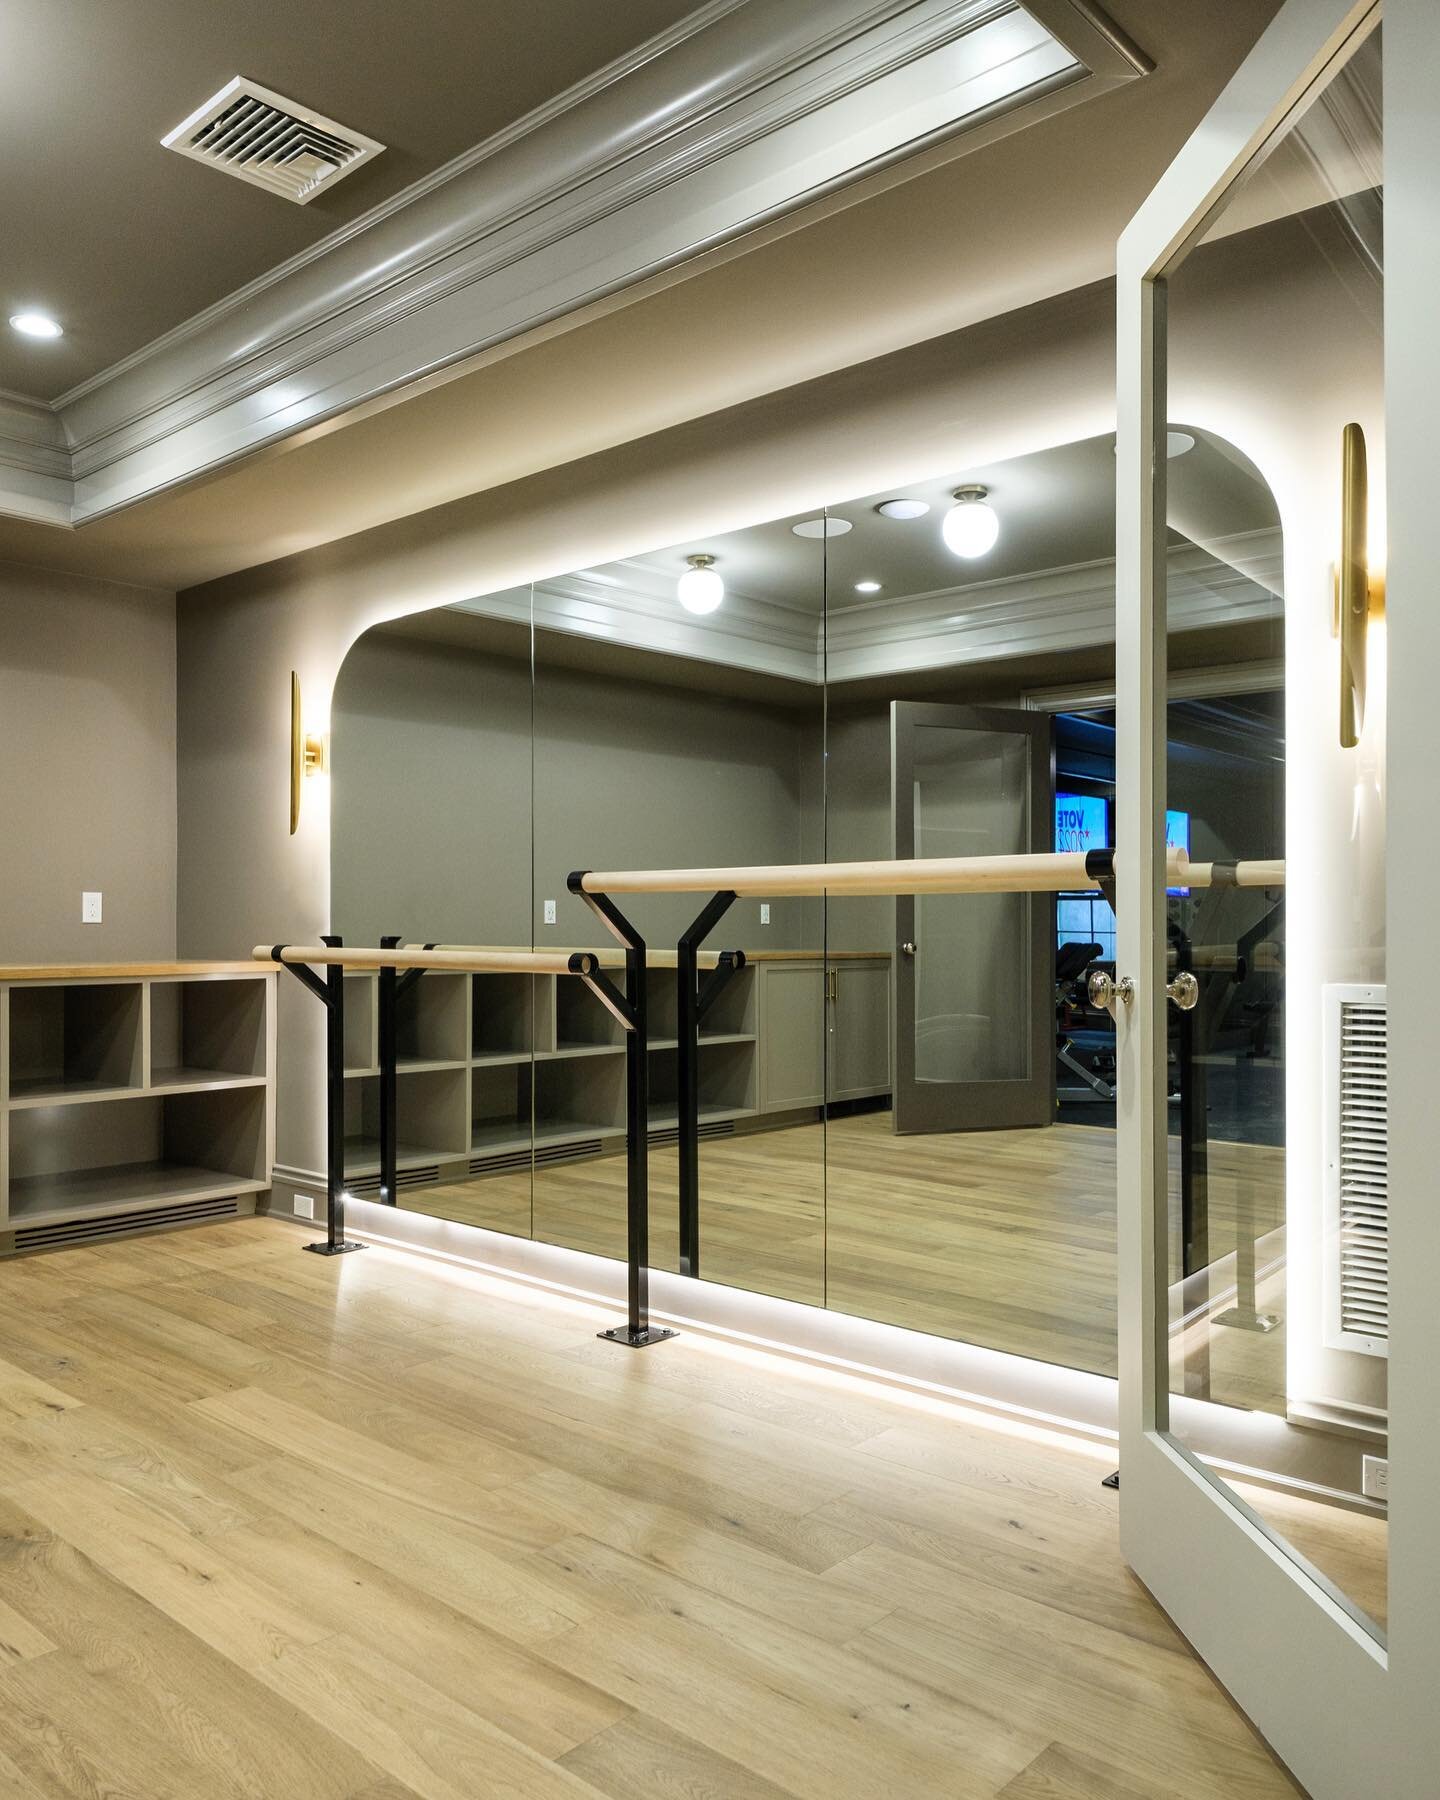 These homeowners carved out a beautiful multipurpose ballet and yoga studio into the basement of their home. Construction by @mjscontractingcorp photo: @Madden studio #weekendworkout #weekendvibes #ballet #luxurylifestyle #homegym #getmoving